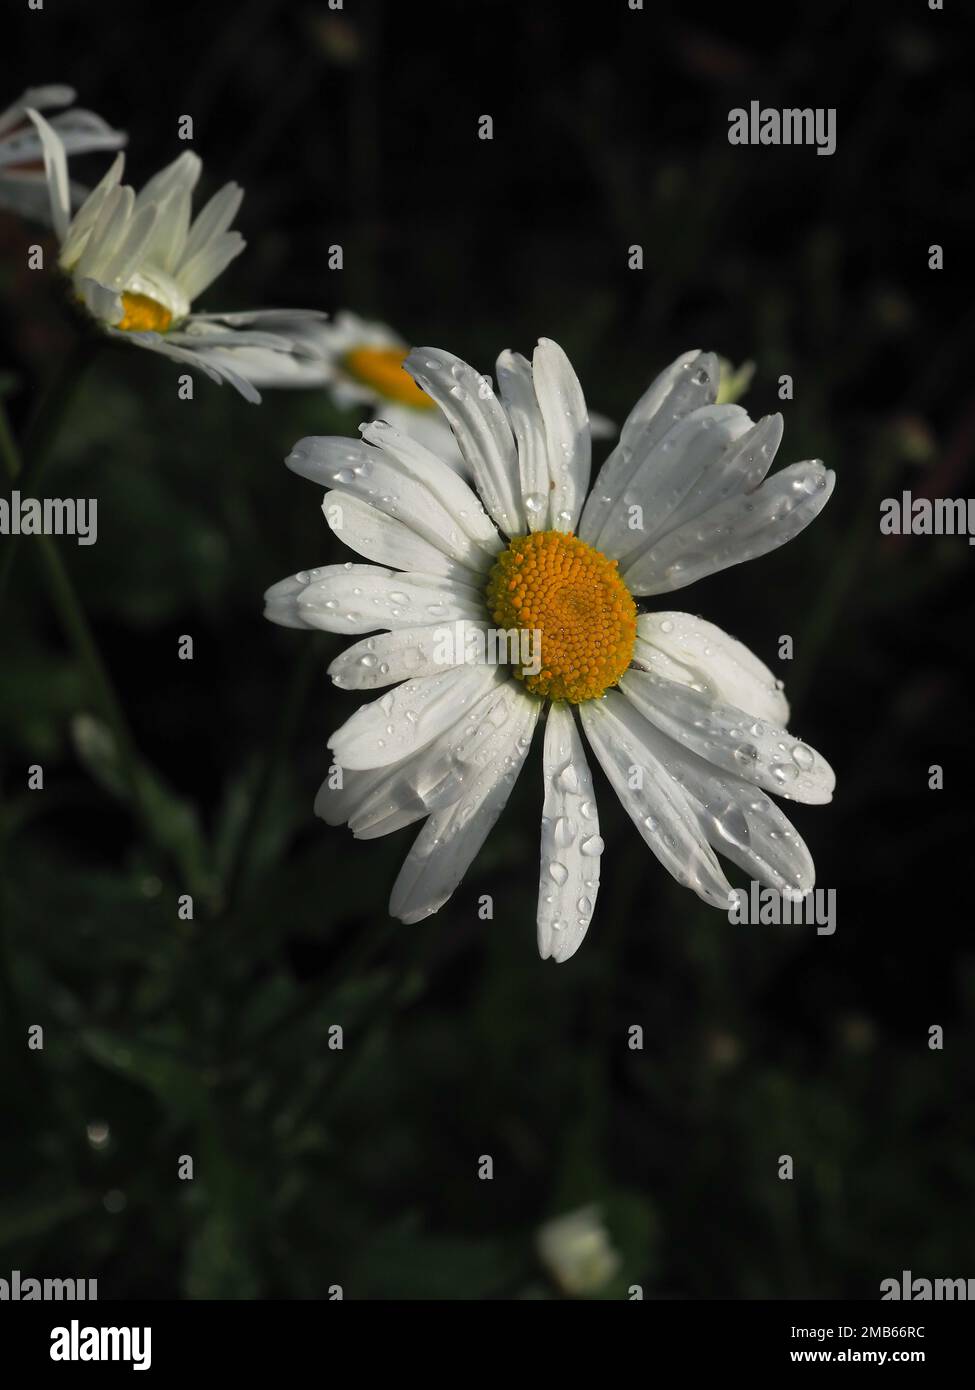 Close up of Leucanthemum x superbum (Shasta daisy) flower in the garden with raindrops on it shining brightly against a dark background Stock Photo